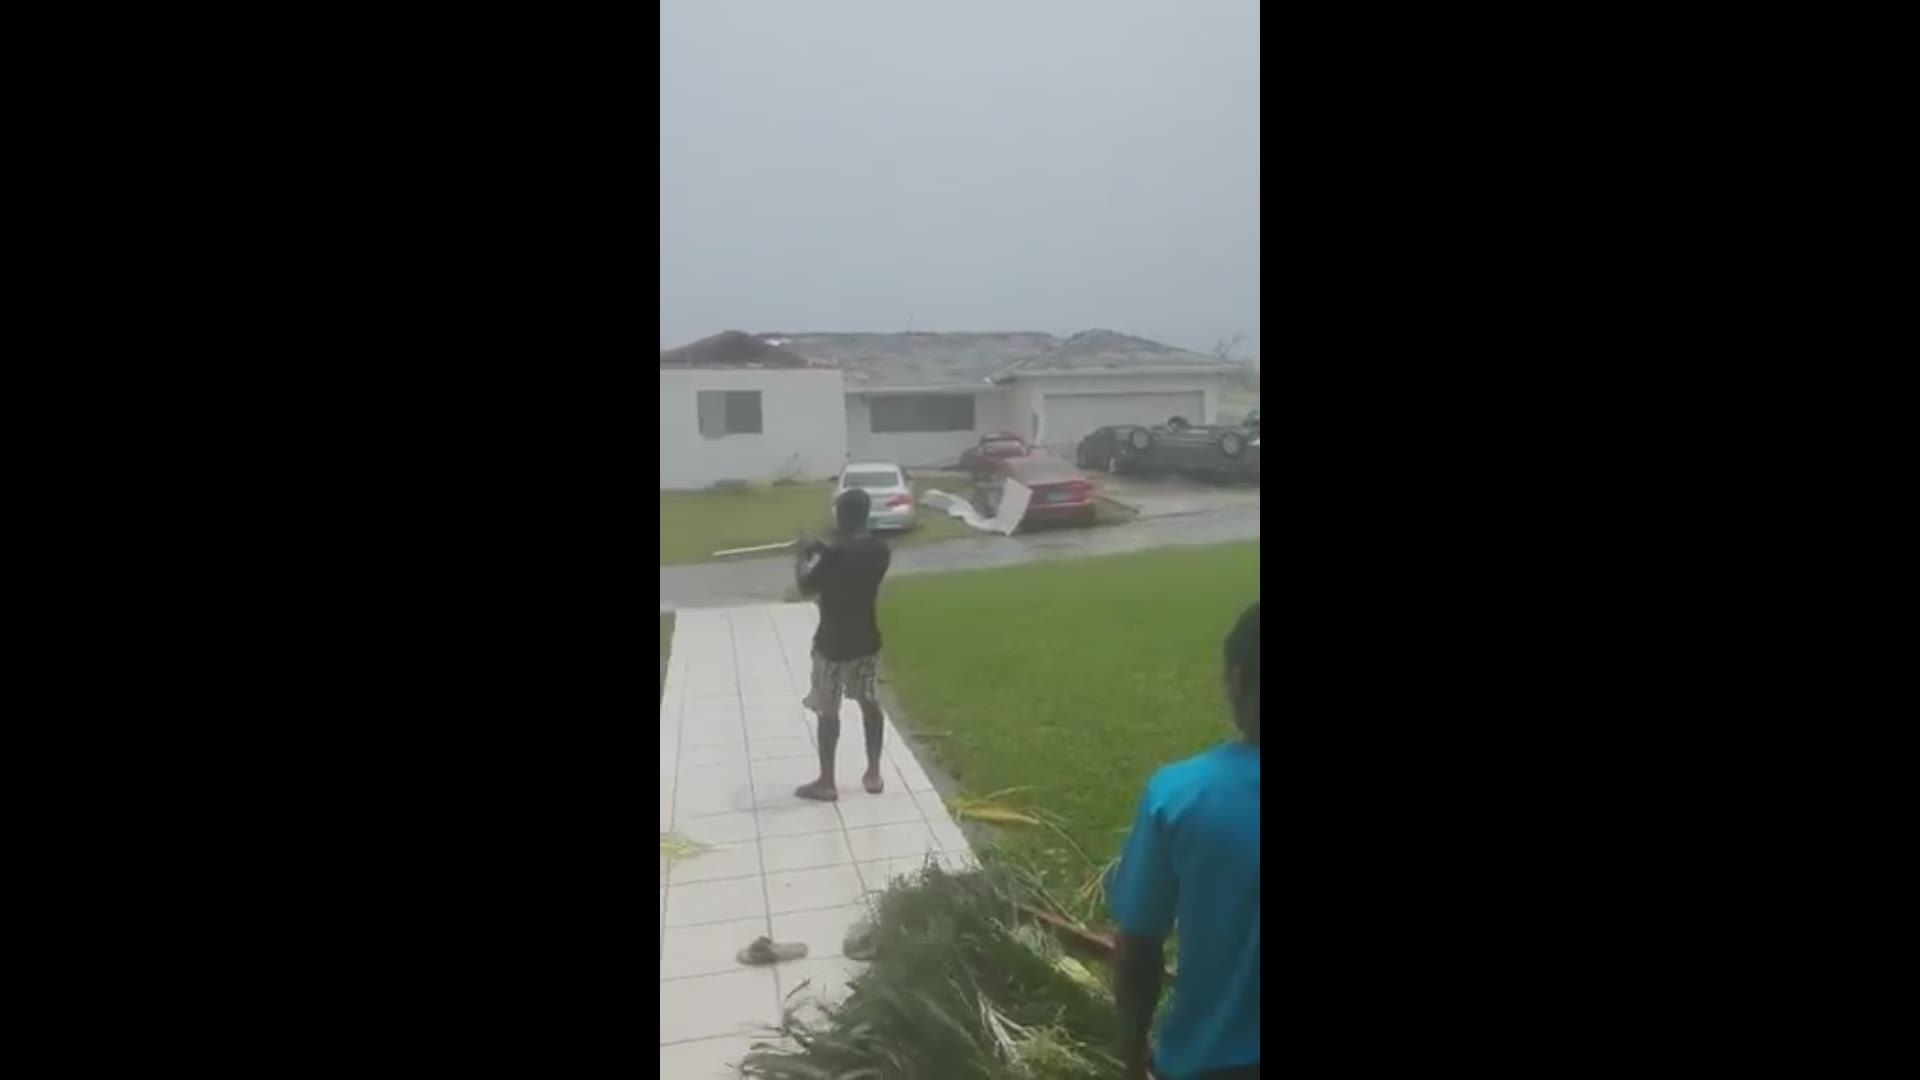 The catastrophic storm made landfall in Elbow Cay, the Bahamas, around 12:45 p.m. Sunday with maximum sustained winds of 185 mph.                
LIVE BLOG ➡️ on.wtsp.com/Dorian
RESOURCES ➡️ on.wtsp.com/Tropics
FREE APP ➡️ on.wtsp.com/app